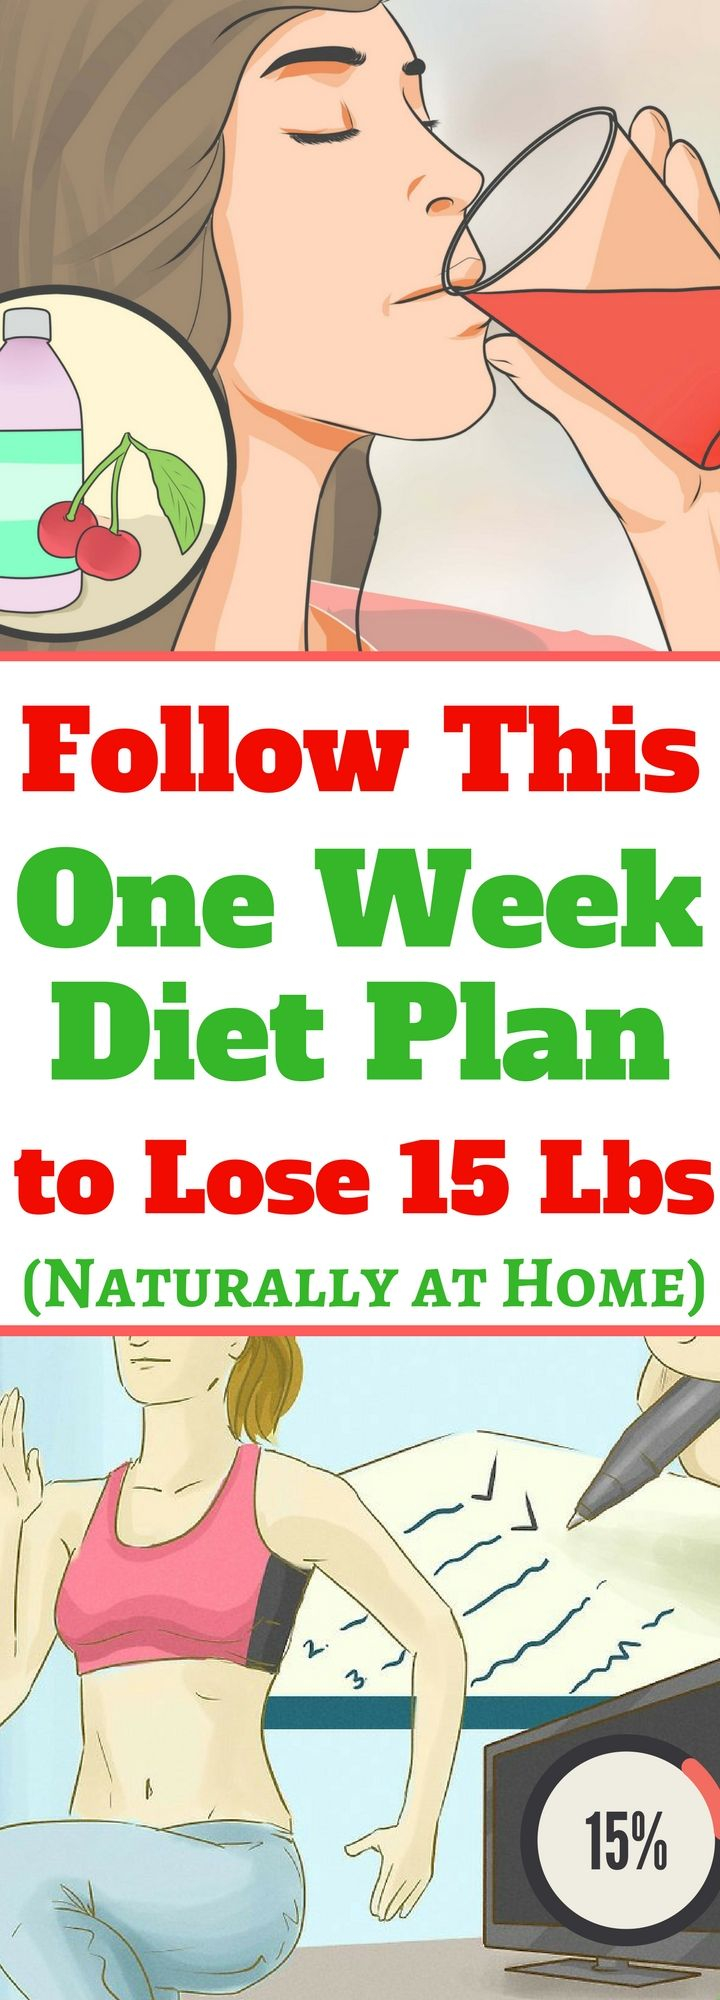 Follow This One Week Diet Plan To Lose 15 Lbs Naturally At Home Read 